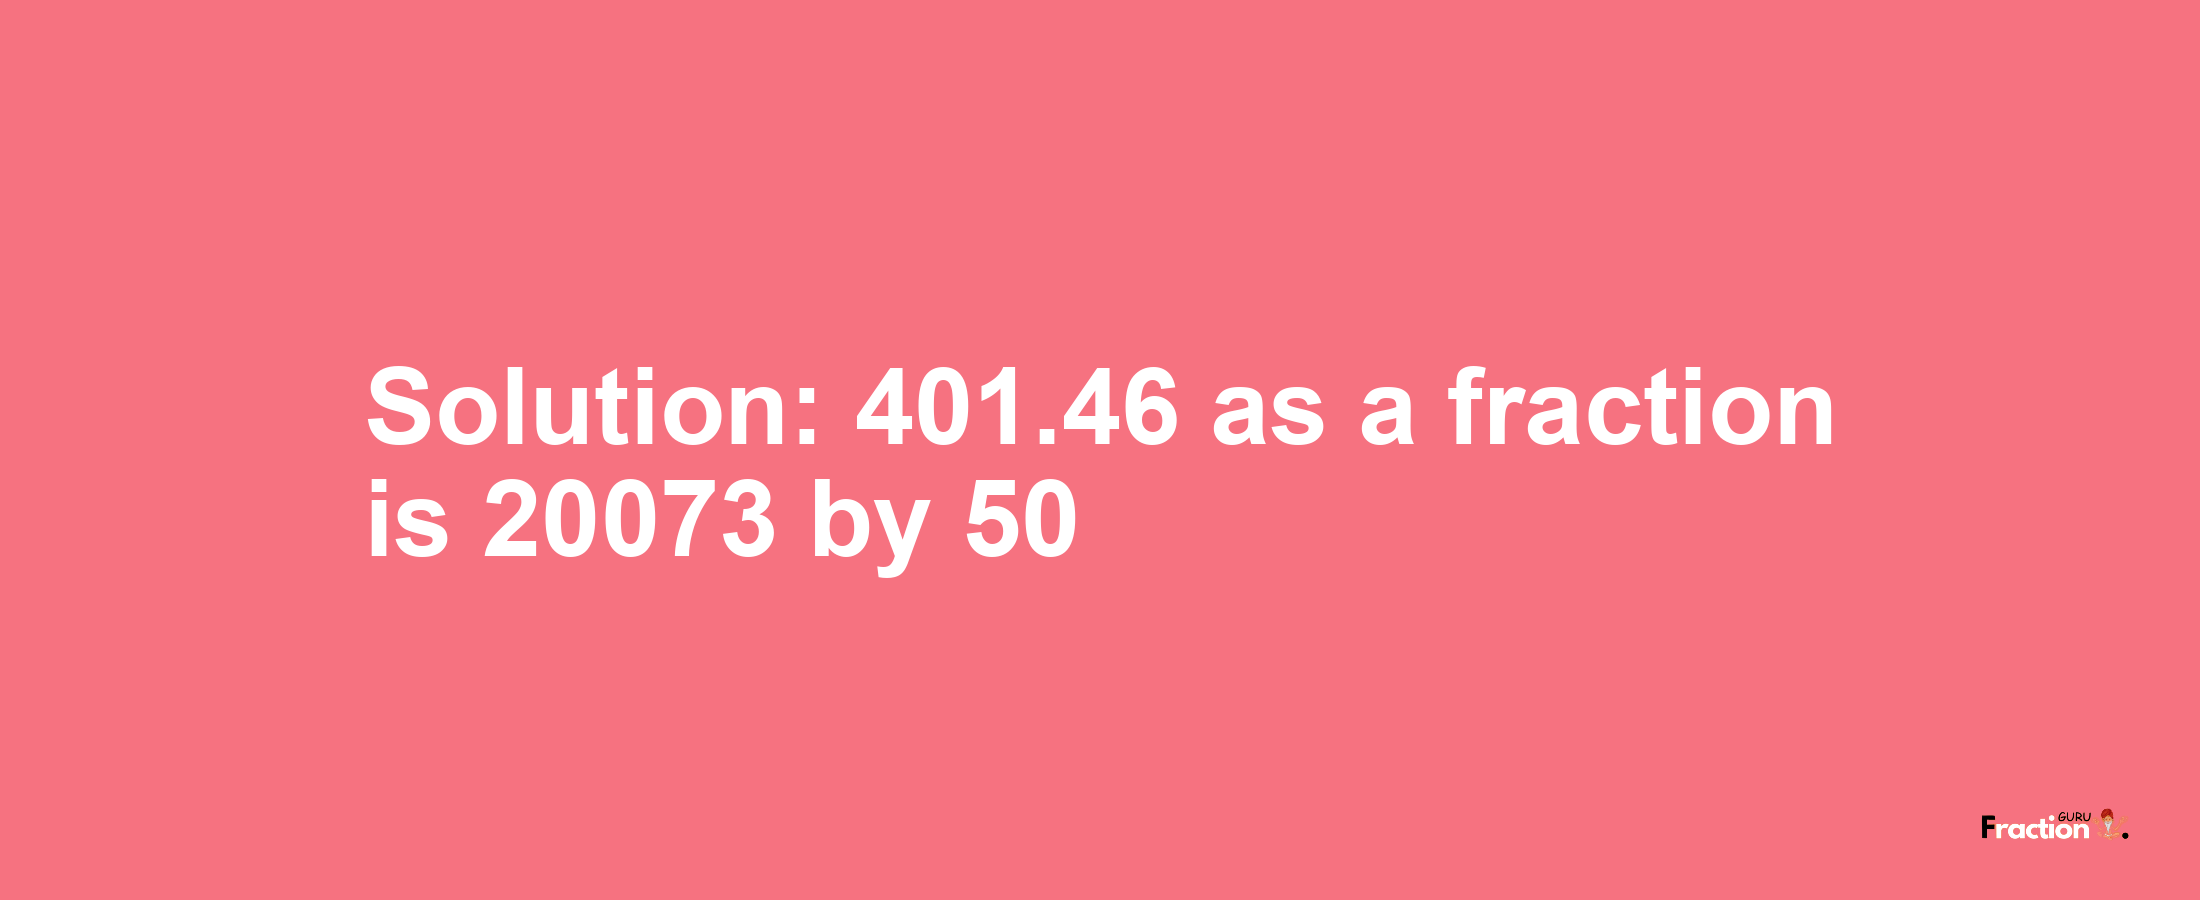 Solution:401.46 as a fraction is 20073/50